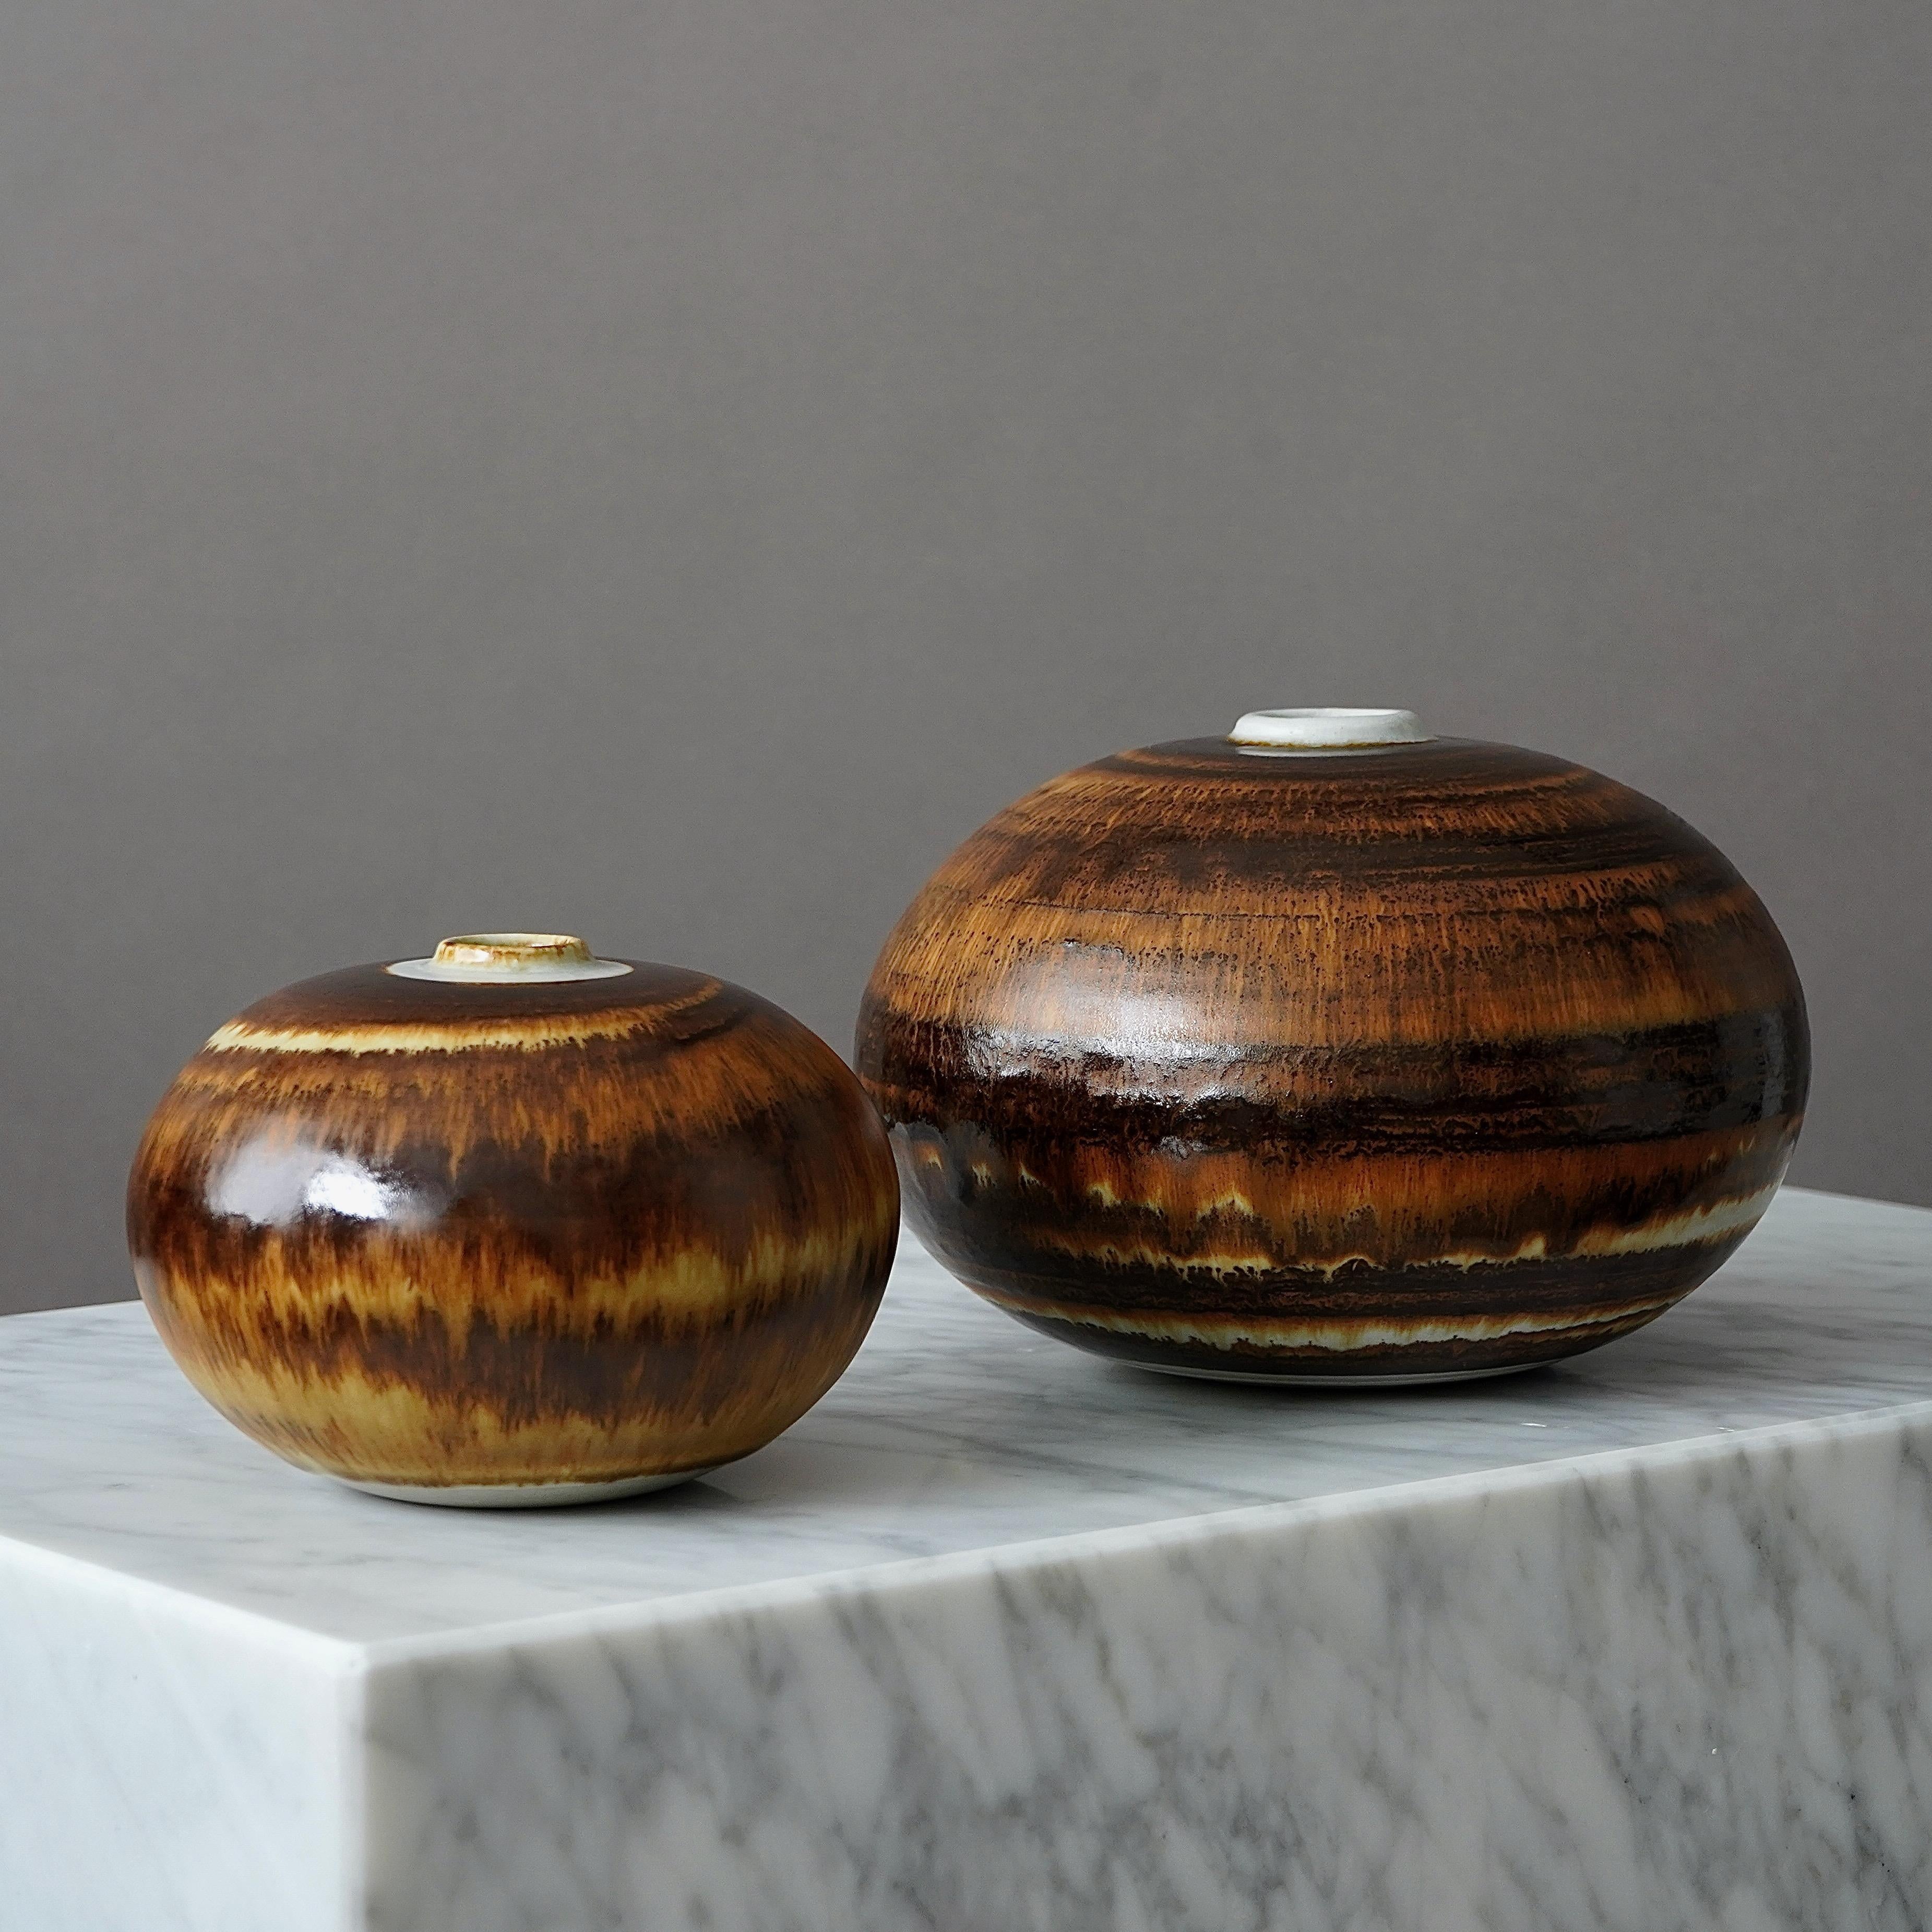 Ceramic A pair of Stoneware Vases by Andersson & Johansson, Höganäs, Sweden, 1977 For Sale